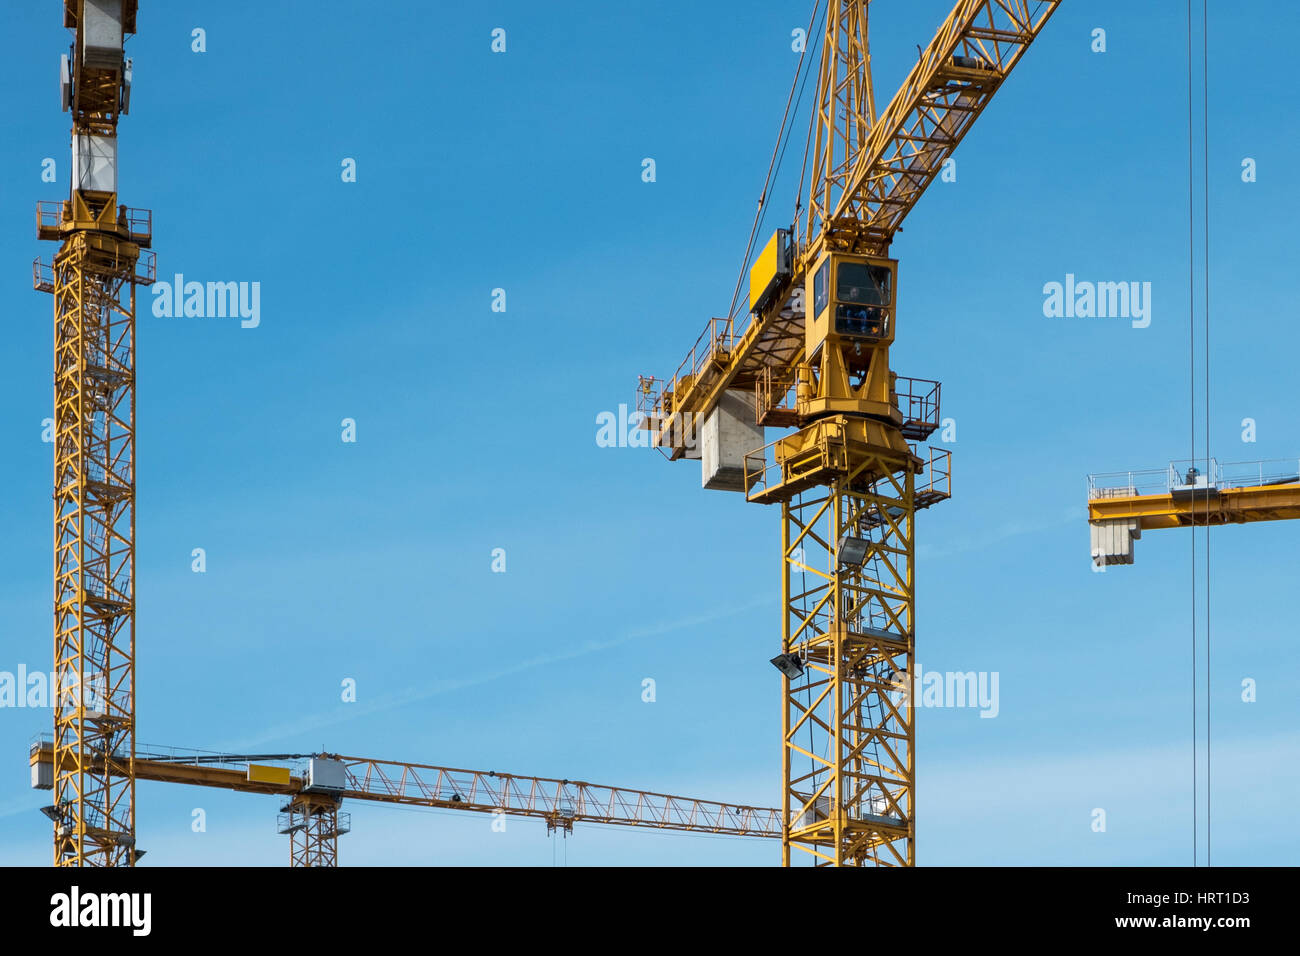 many cranes on blue sky at construction site Stock Photo